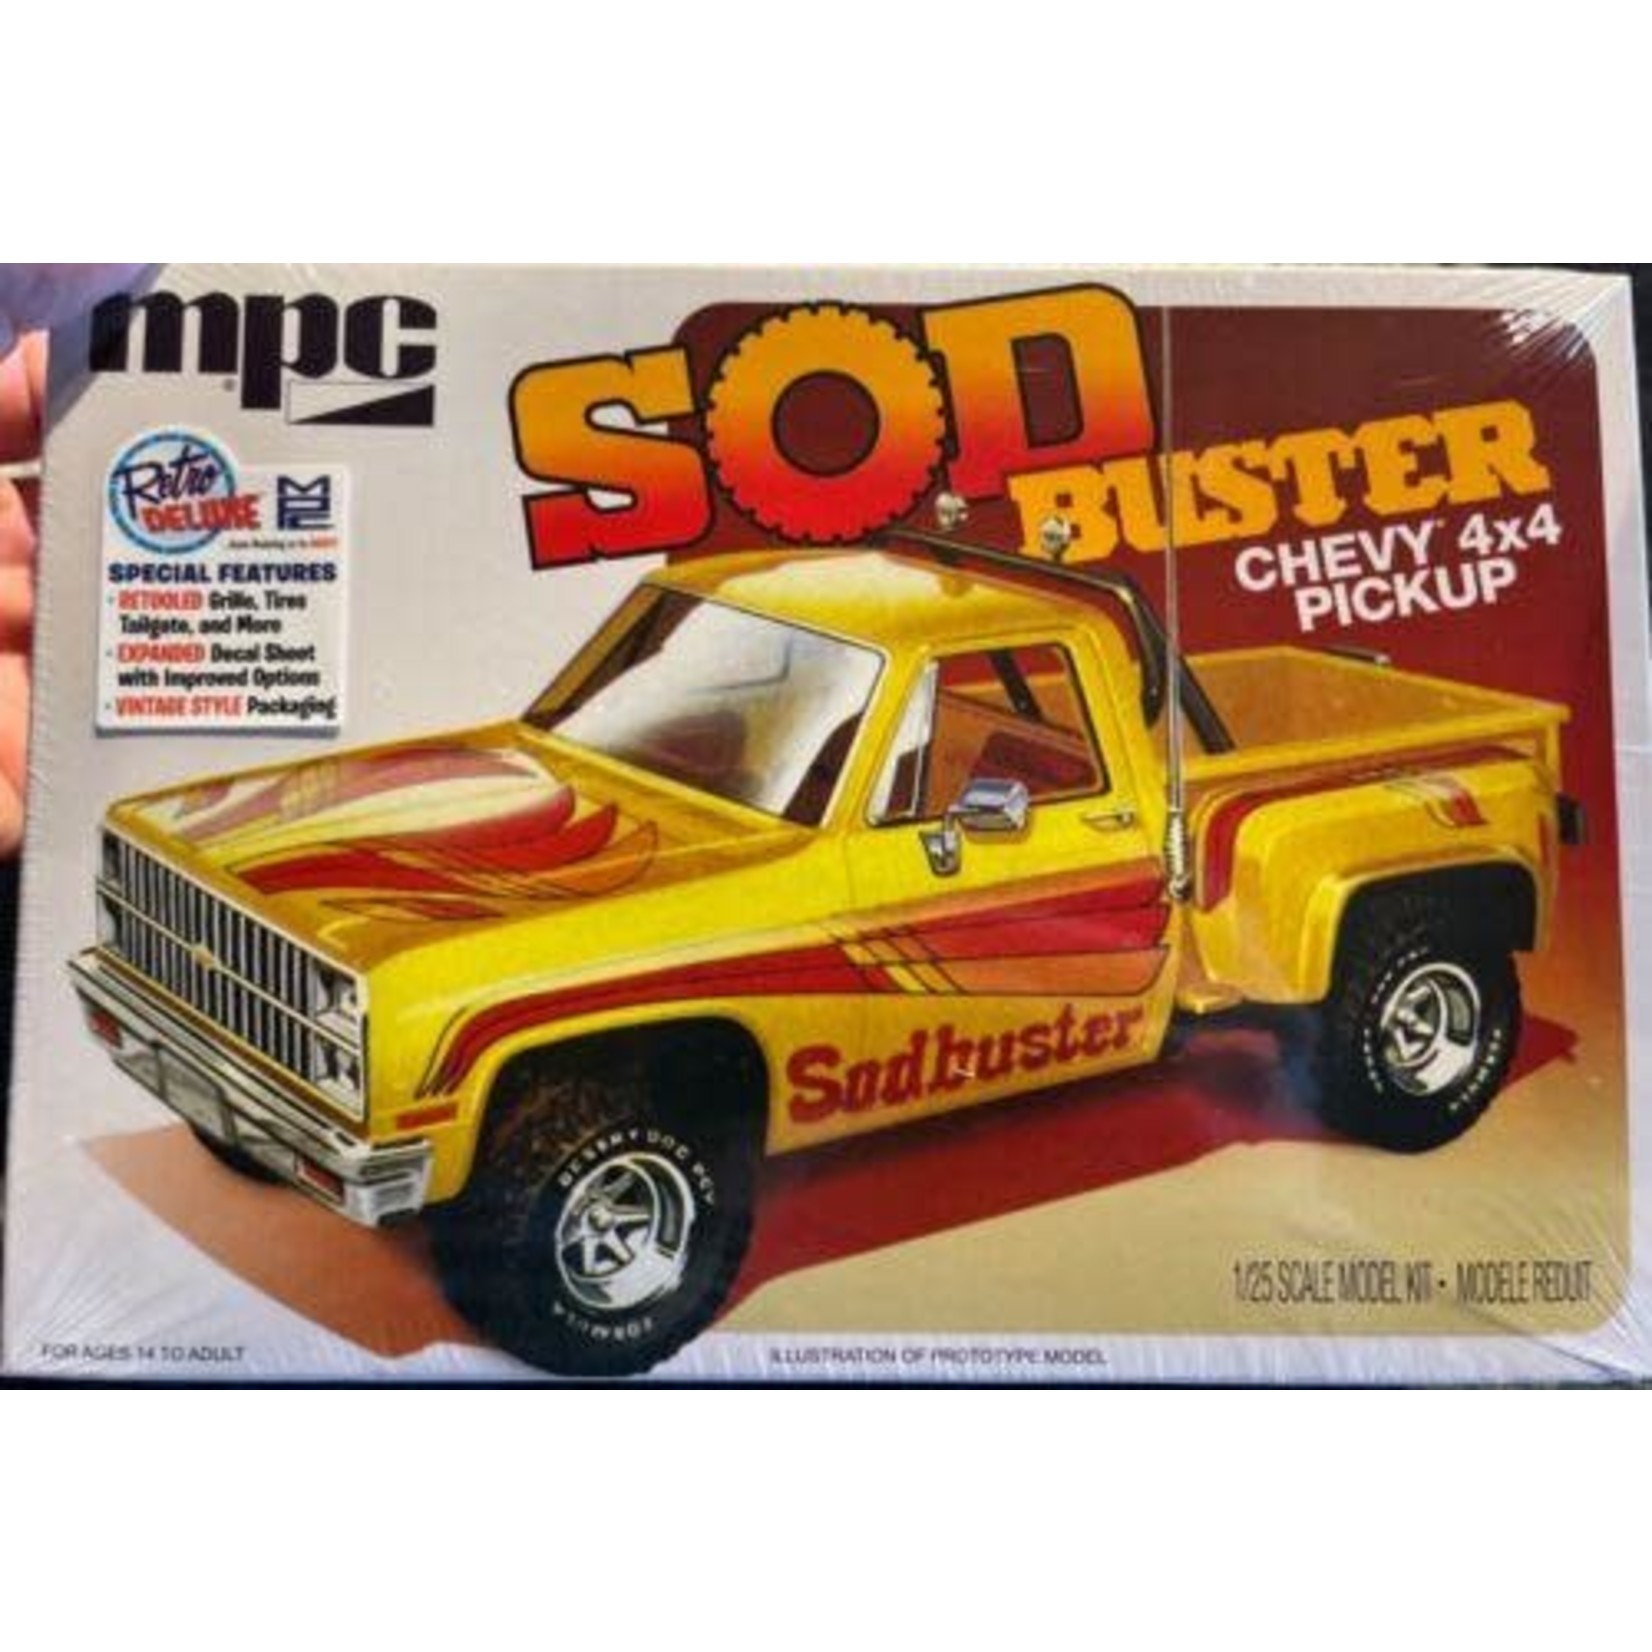 MPC Models 1/25 1981 Chevy Stepside Pickup Sod Buster	Kit